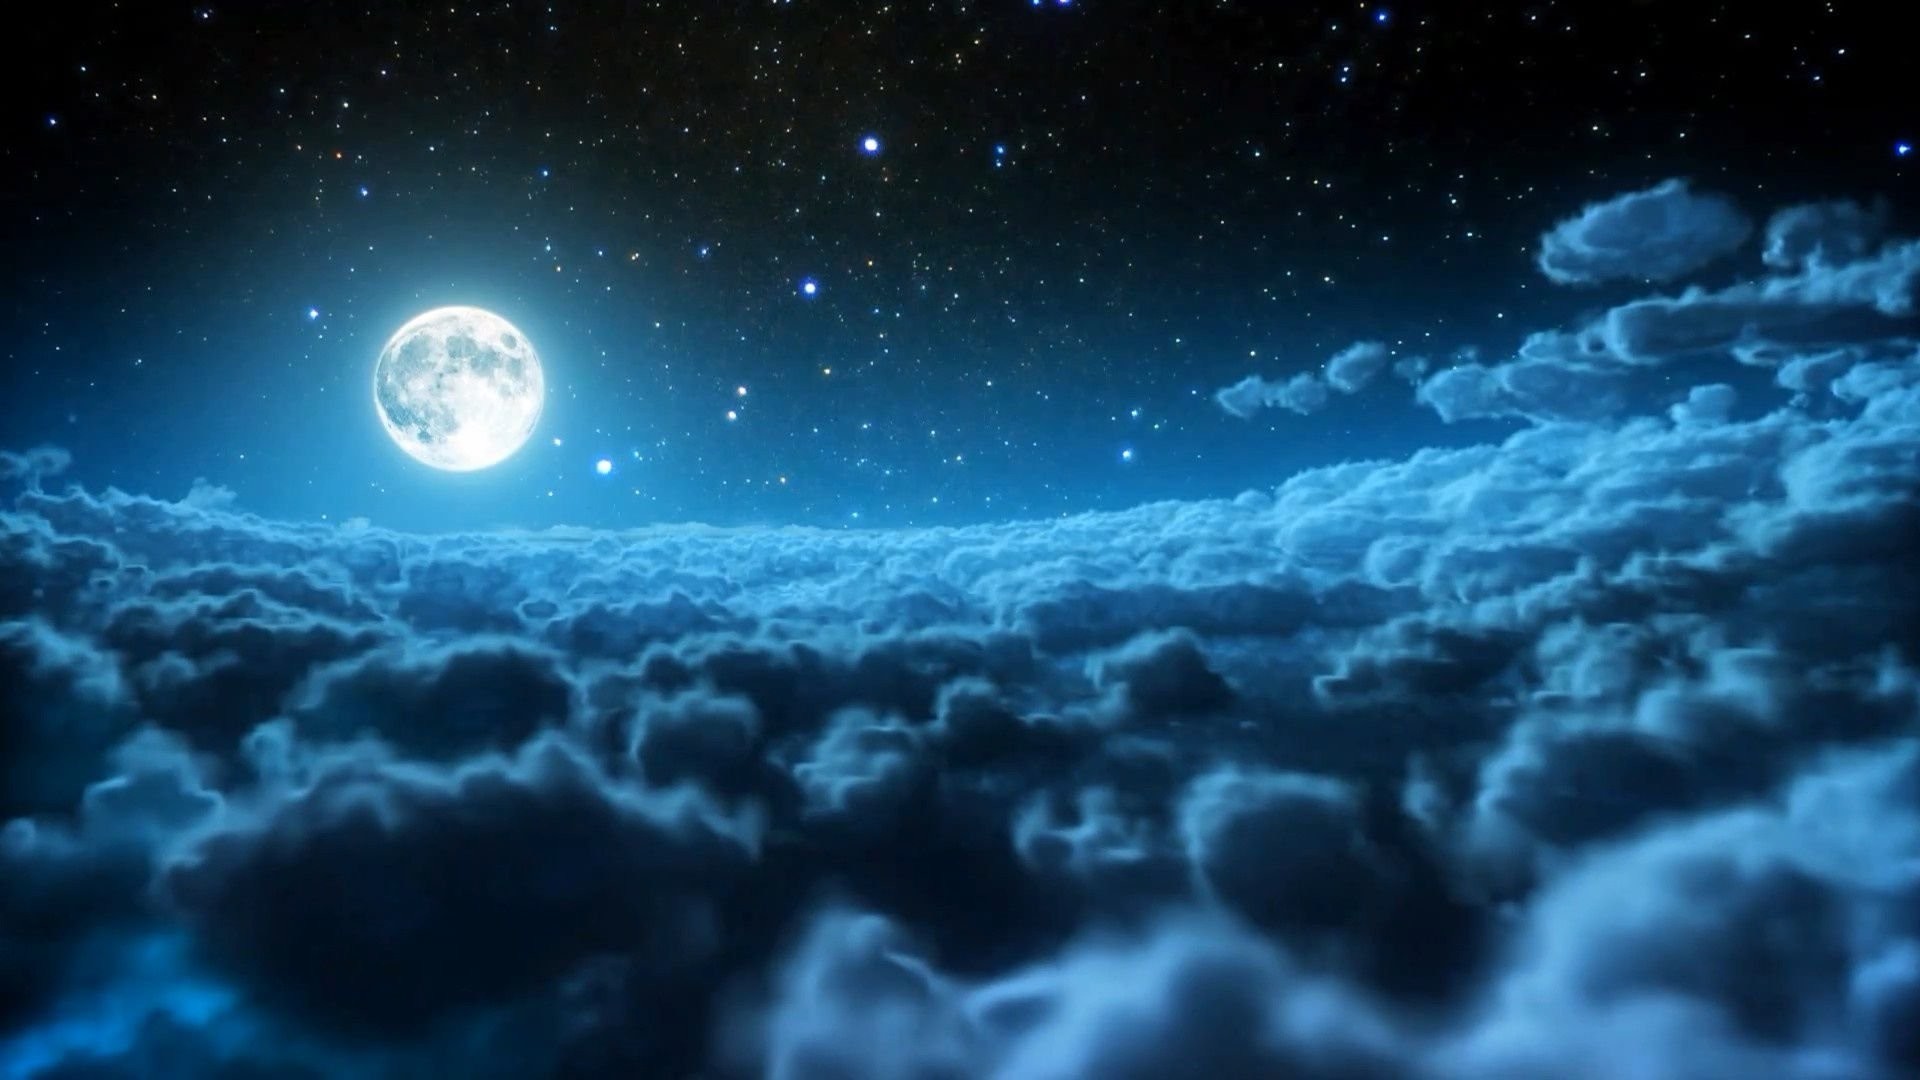 Free download Full Moon and Stars Wallpaper 60 images [1920x1080] for